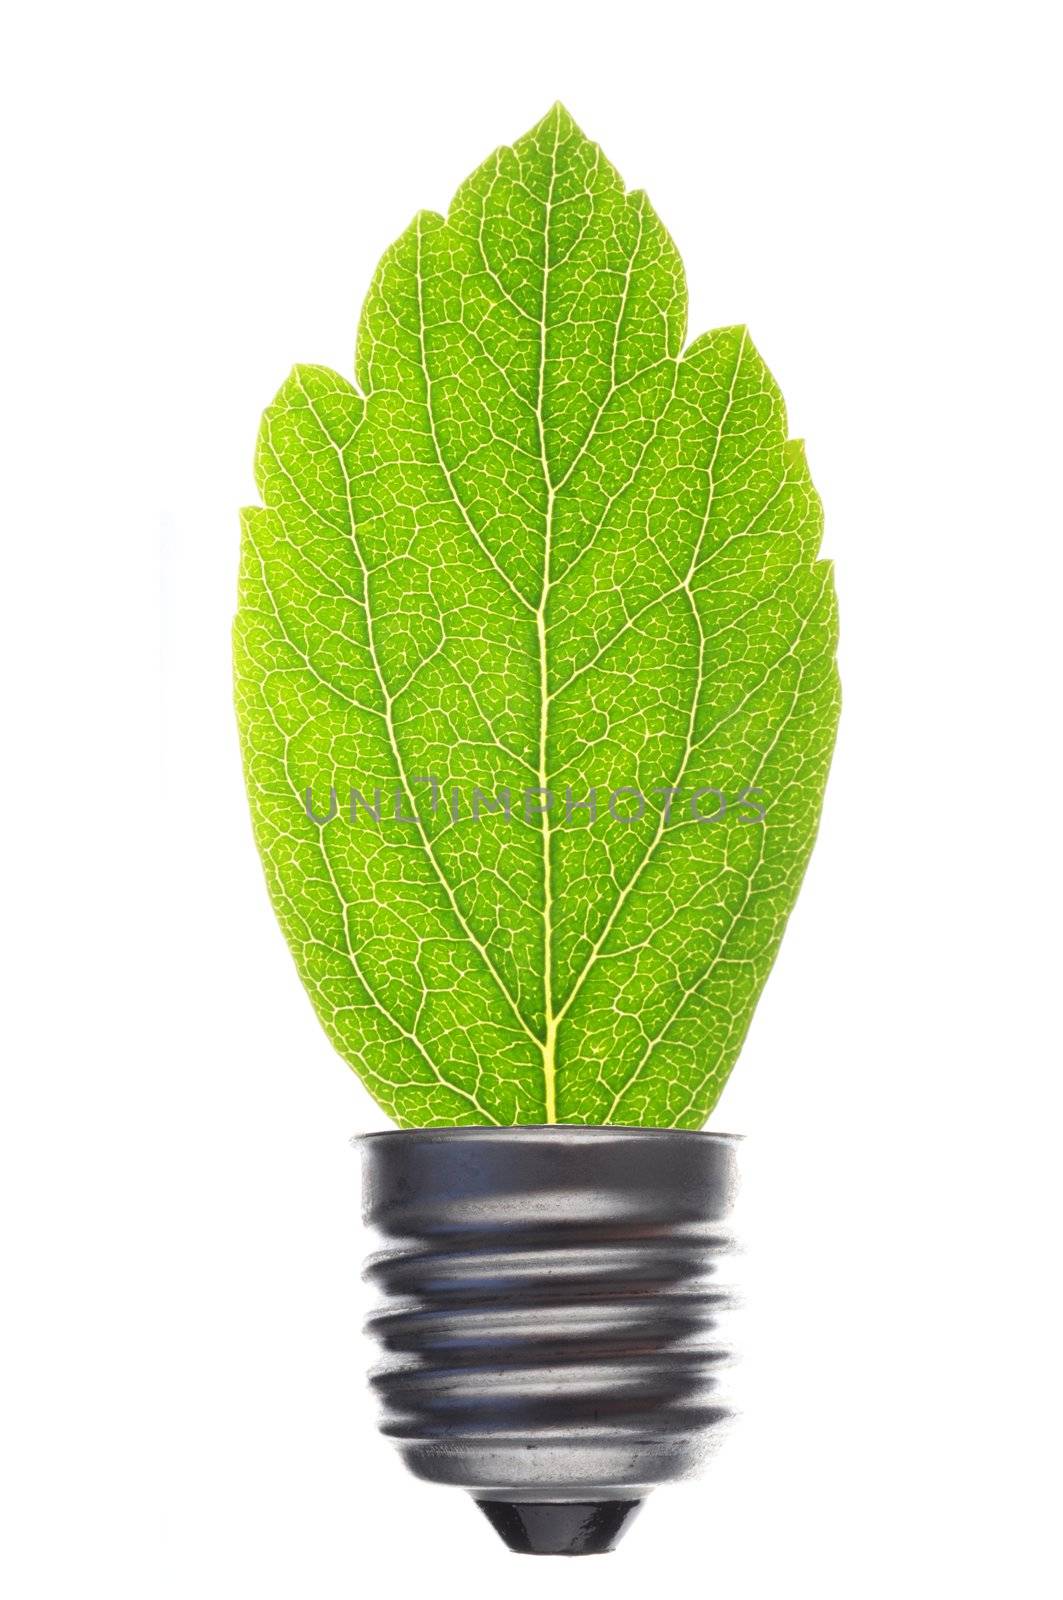 green leaf and bulb isolated on white showing ecological power concept